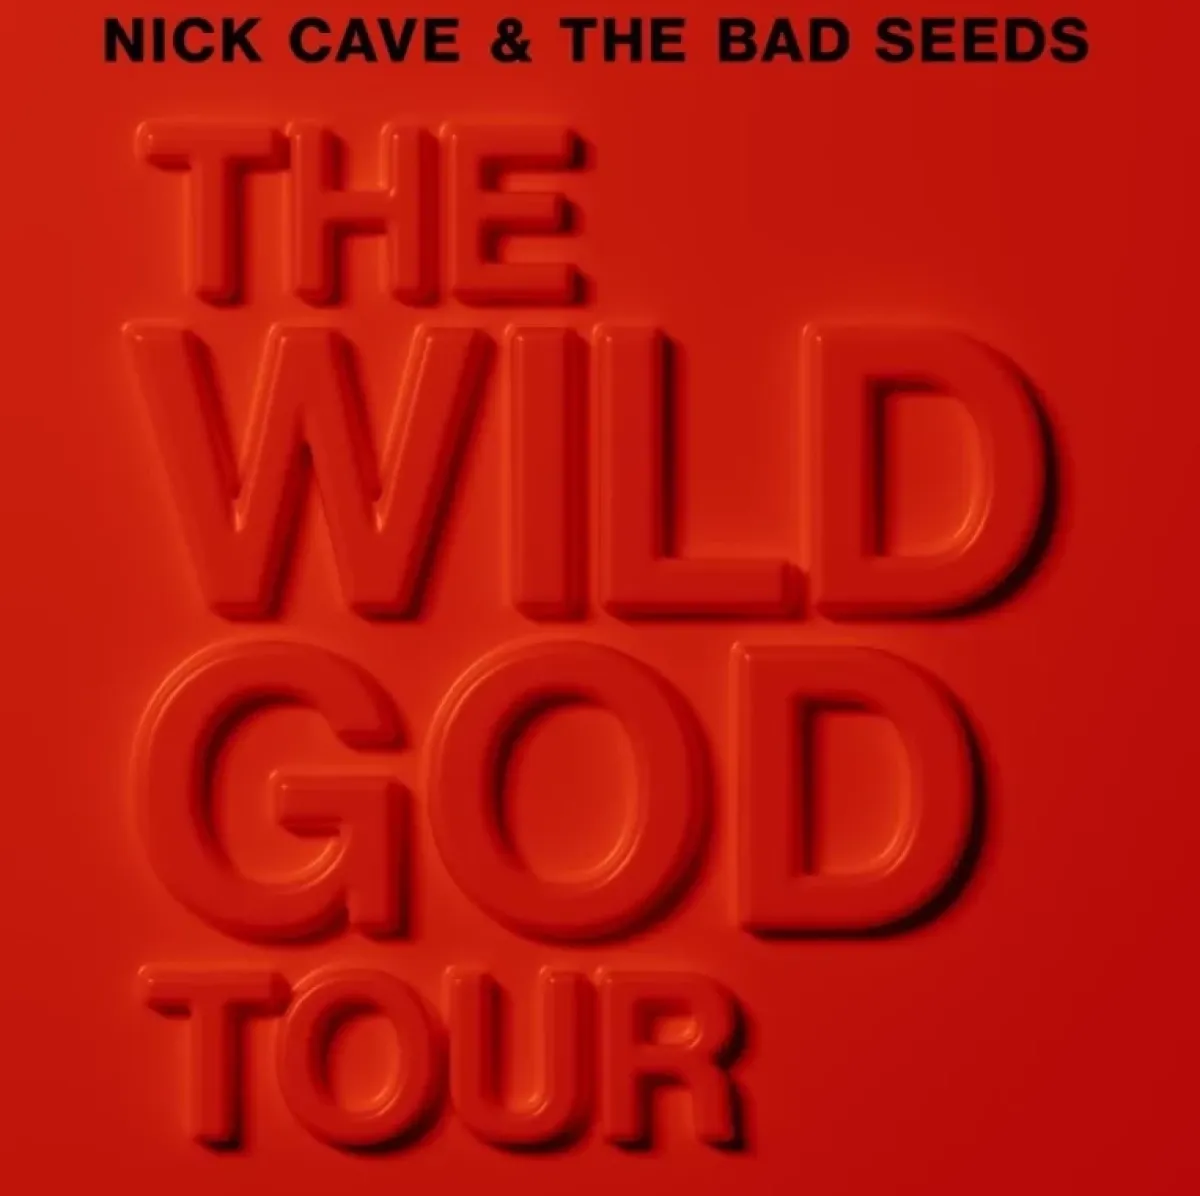 Nick Cave And The Bad Seeds en 3Arena Dublin Tickets